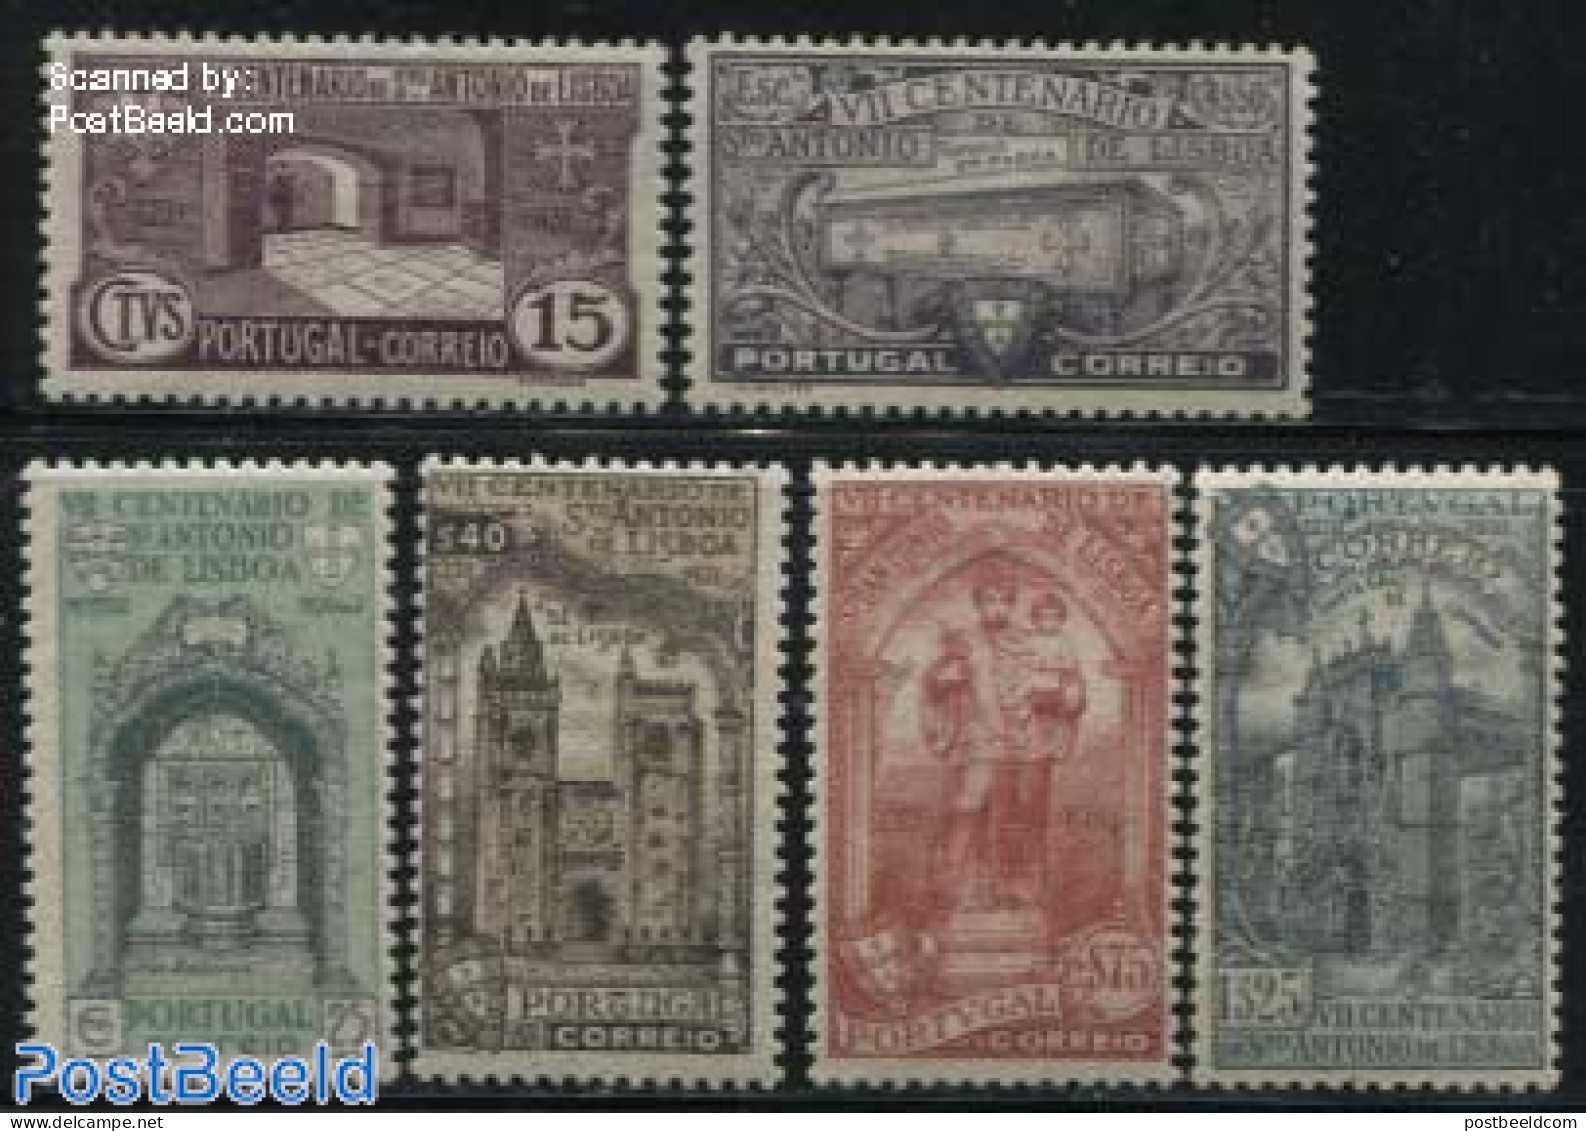 Portugal 1931 St. Antonius Of Padua 6v, Mint NH, Religion - Churches, Temples, Mosques, Synagogues - Religion - Unused Stamps